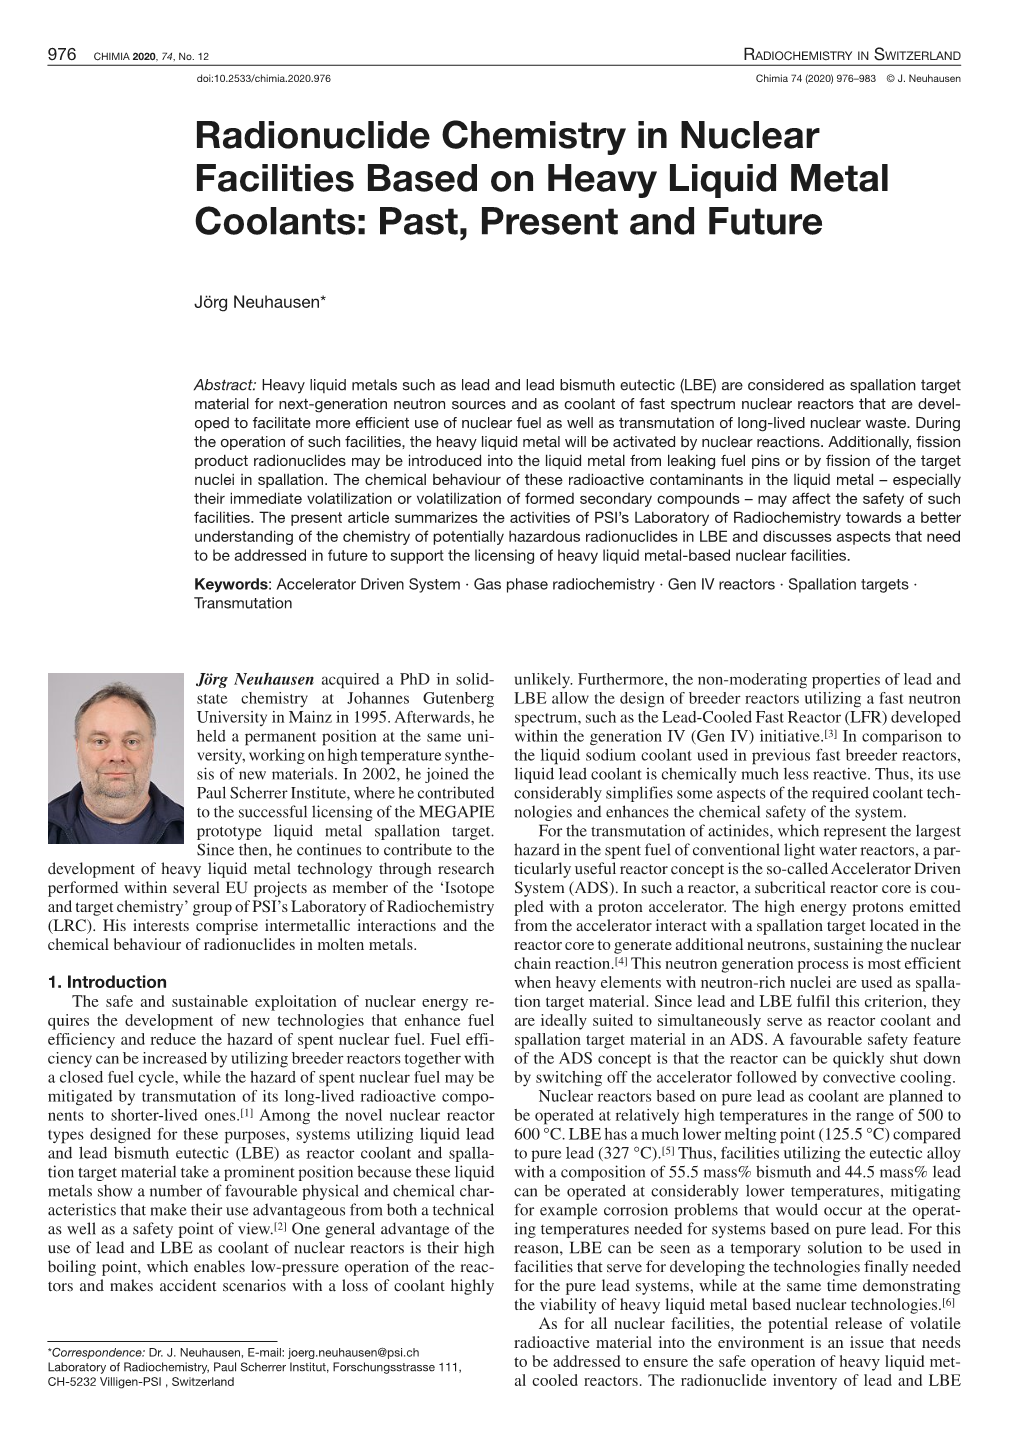 Radionuclide Chemistry in Nuclear Facilities Based on Heavy Liquid Metal Coolants: Past, Present and Future